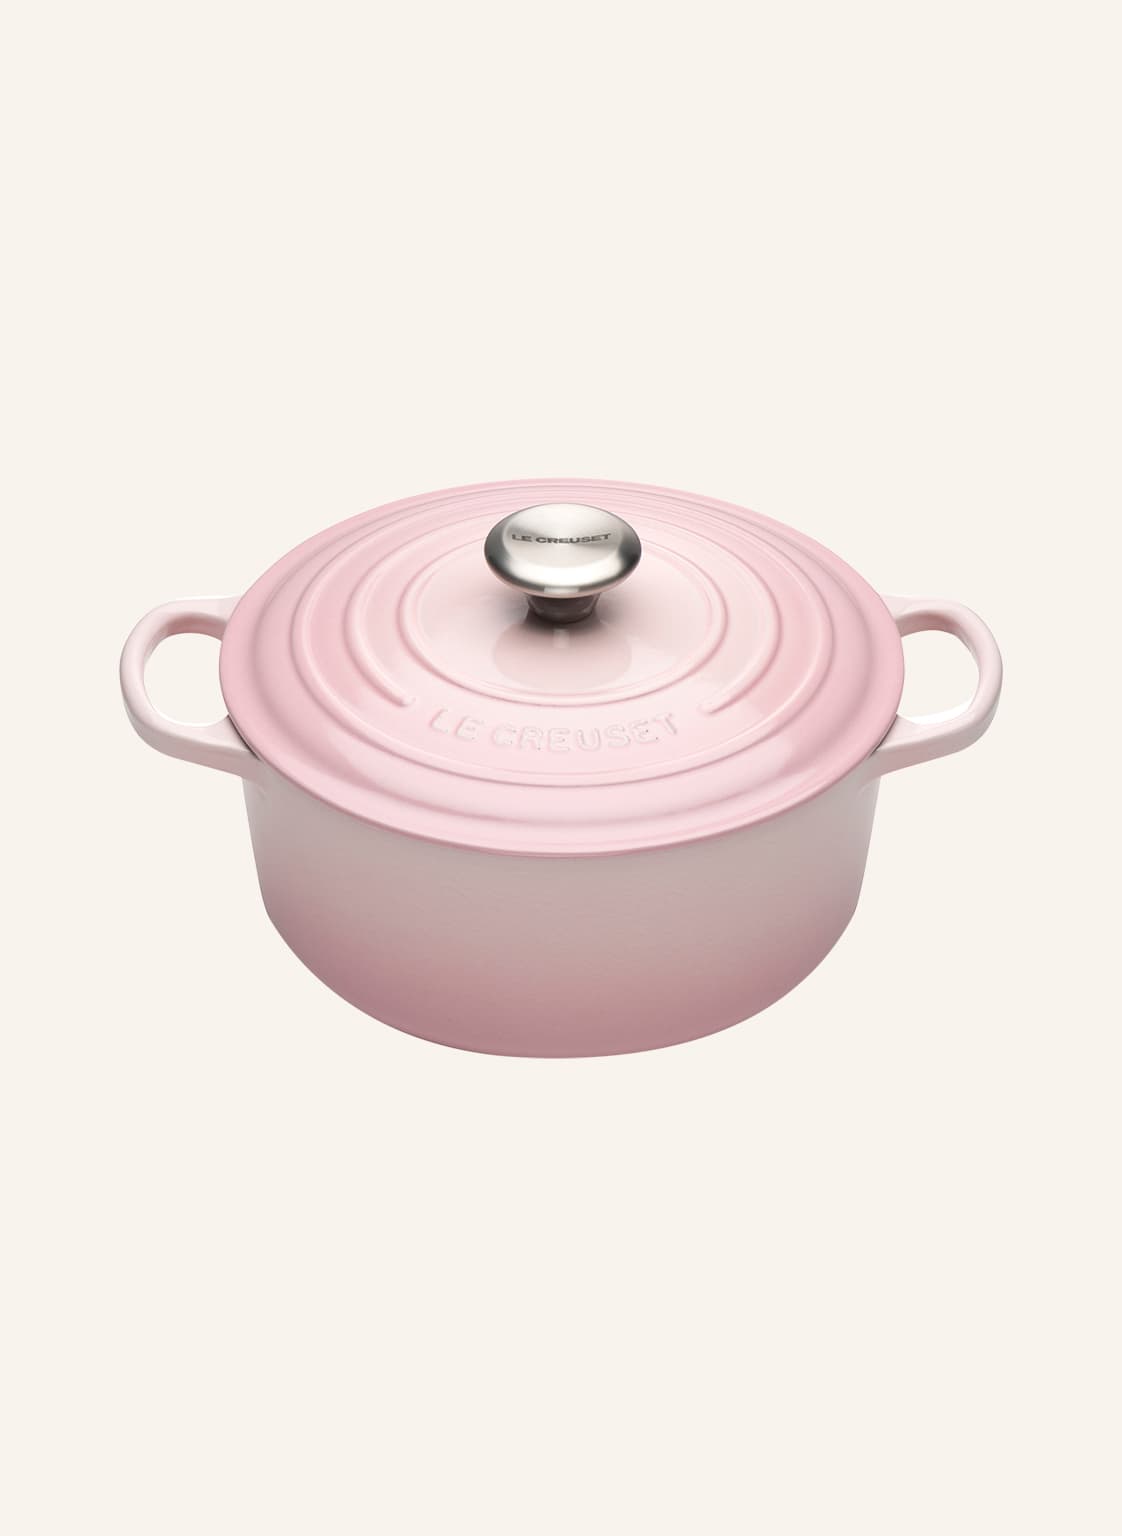 Image of Le Creuset Bräter Signature pink